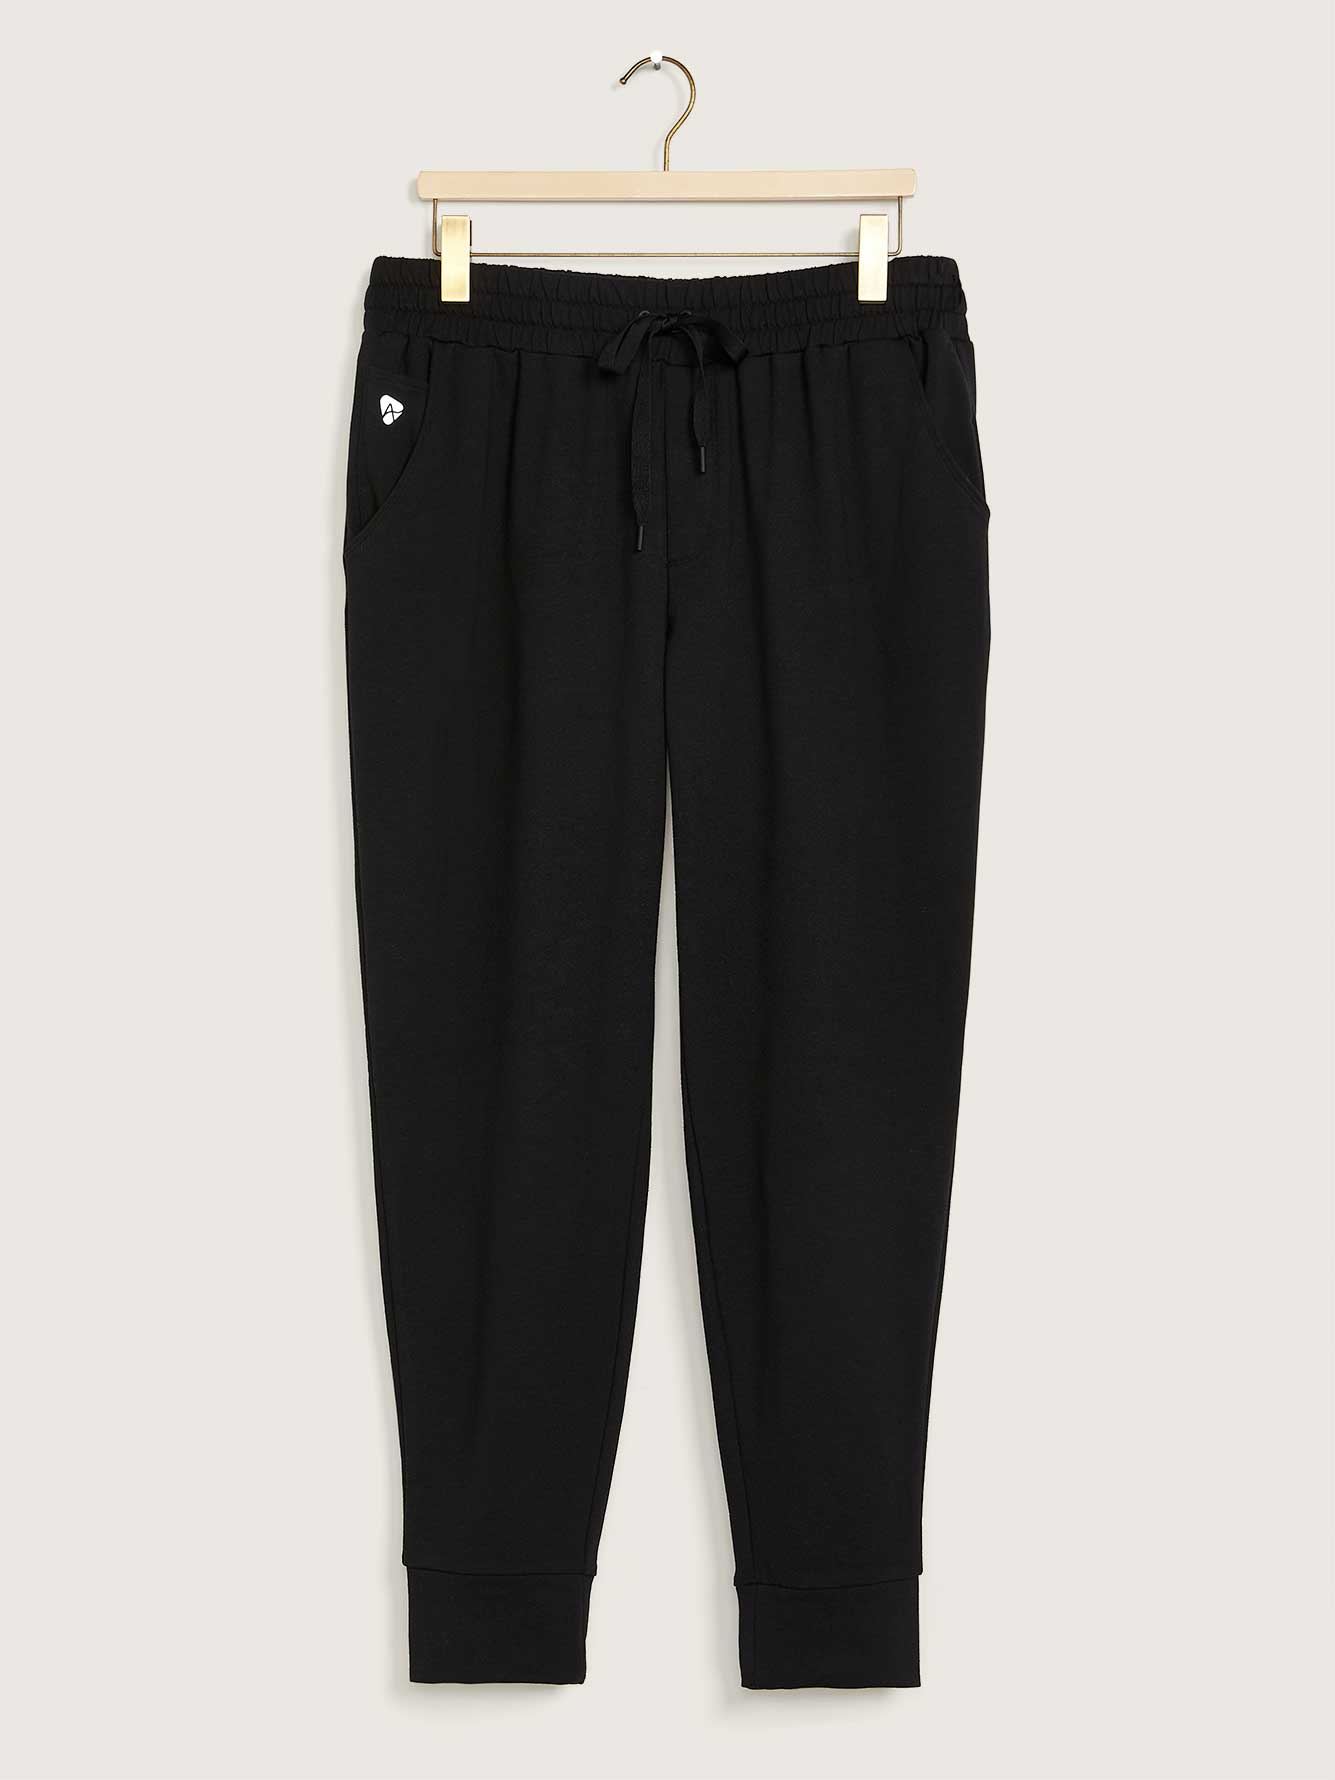 French Terry Basic Jogger with Pockets - Active Zone